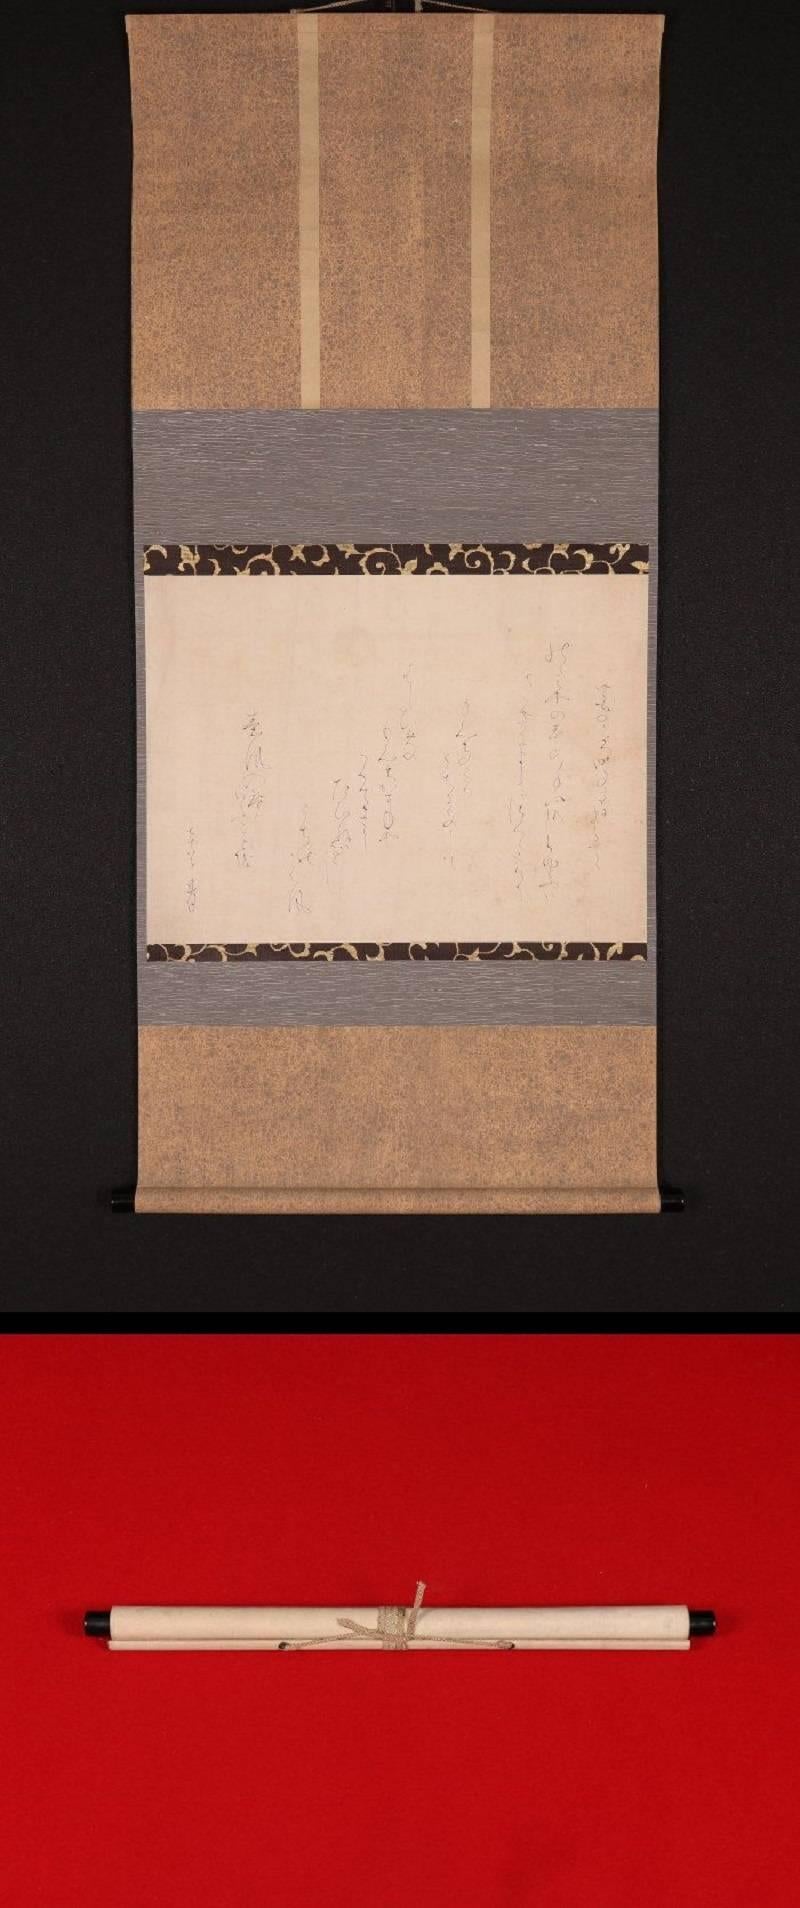 Japan, a rare authentic hand-painted on paper scroll from one of Japan's most important 19th century poets, Otagaki Rengetsu (1791-1875).

Title: Waka, Signature (Seal)
Two Poems:

